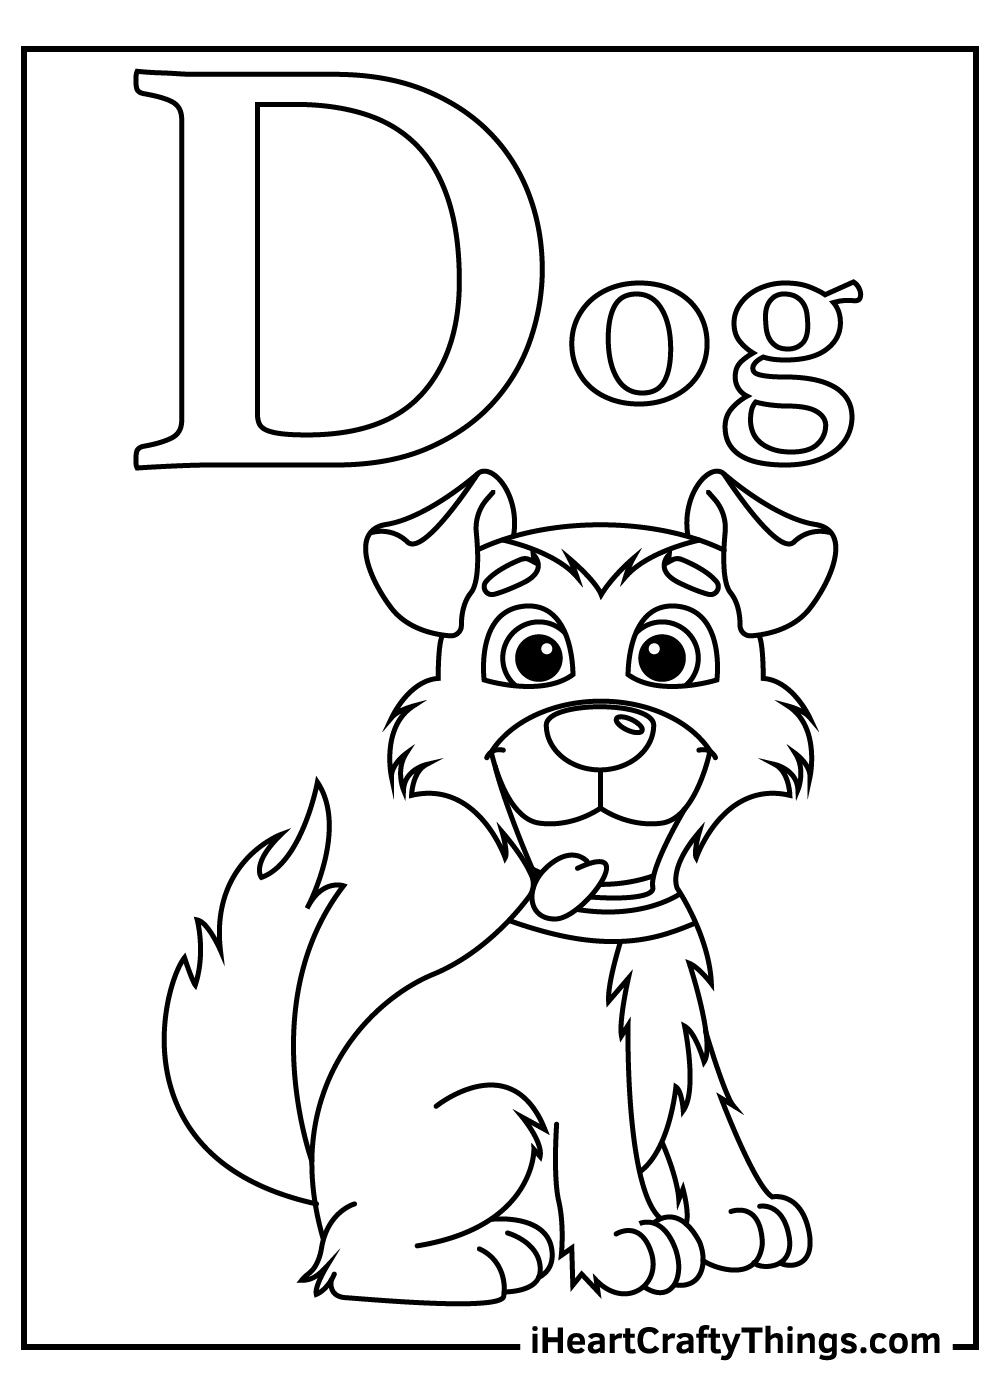 Letter d coloring pages free printables